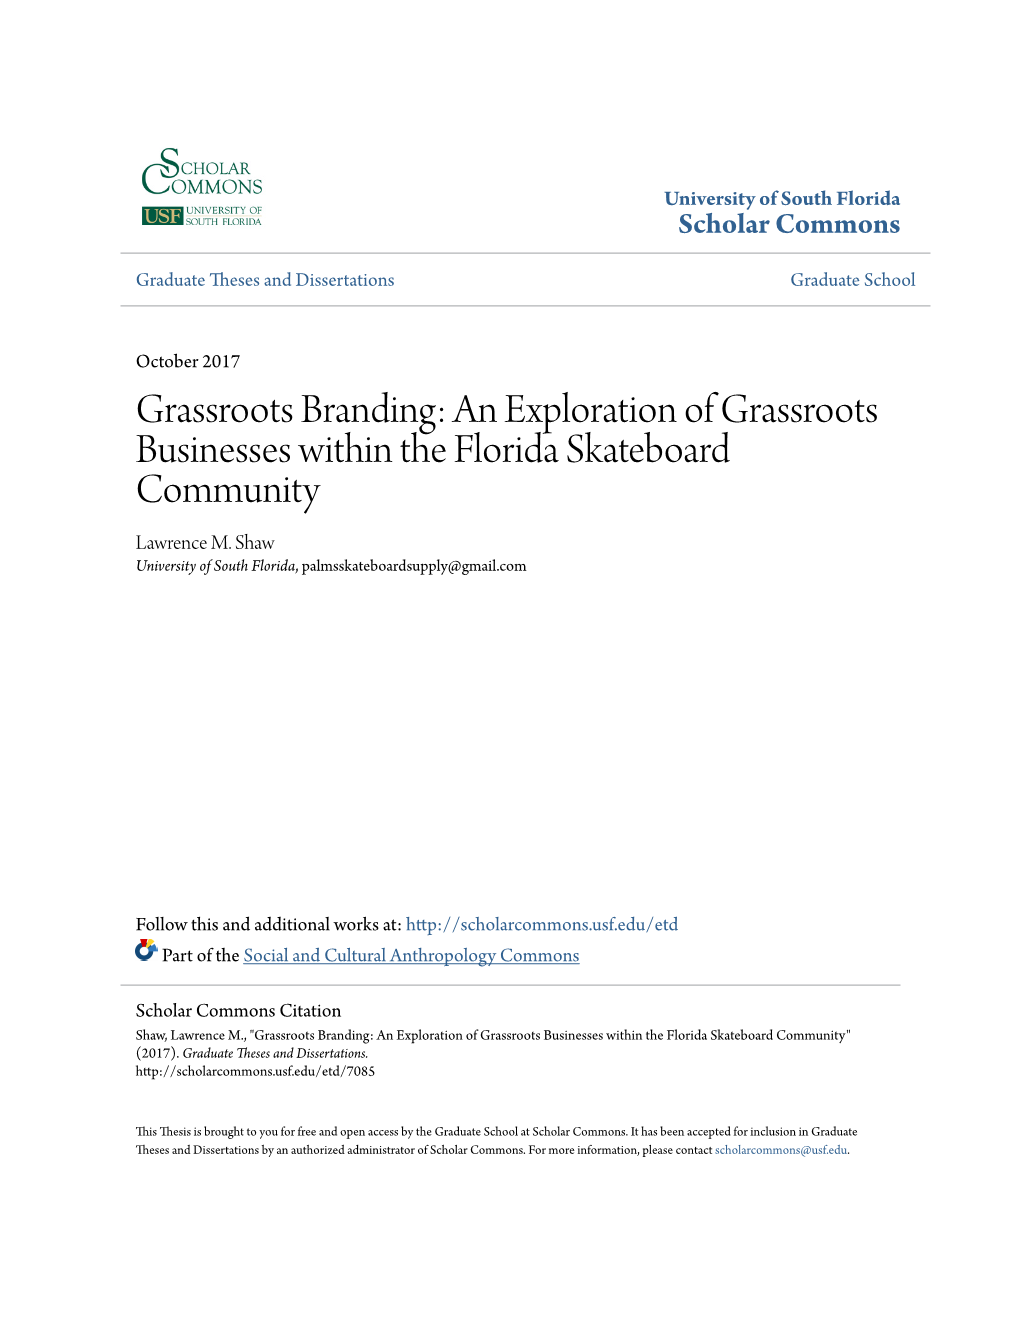 An Exploration of Grassroots Businesses Within the Florida Skateboard Community Lawrence M